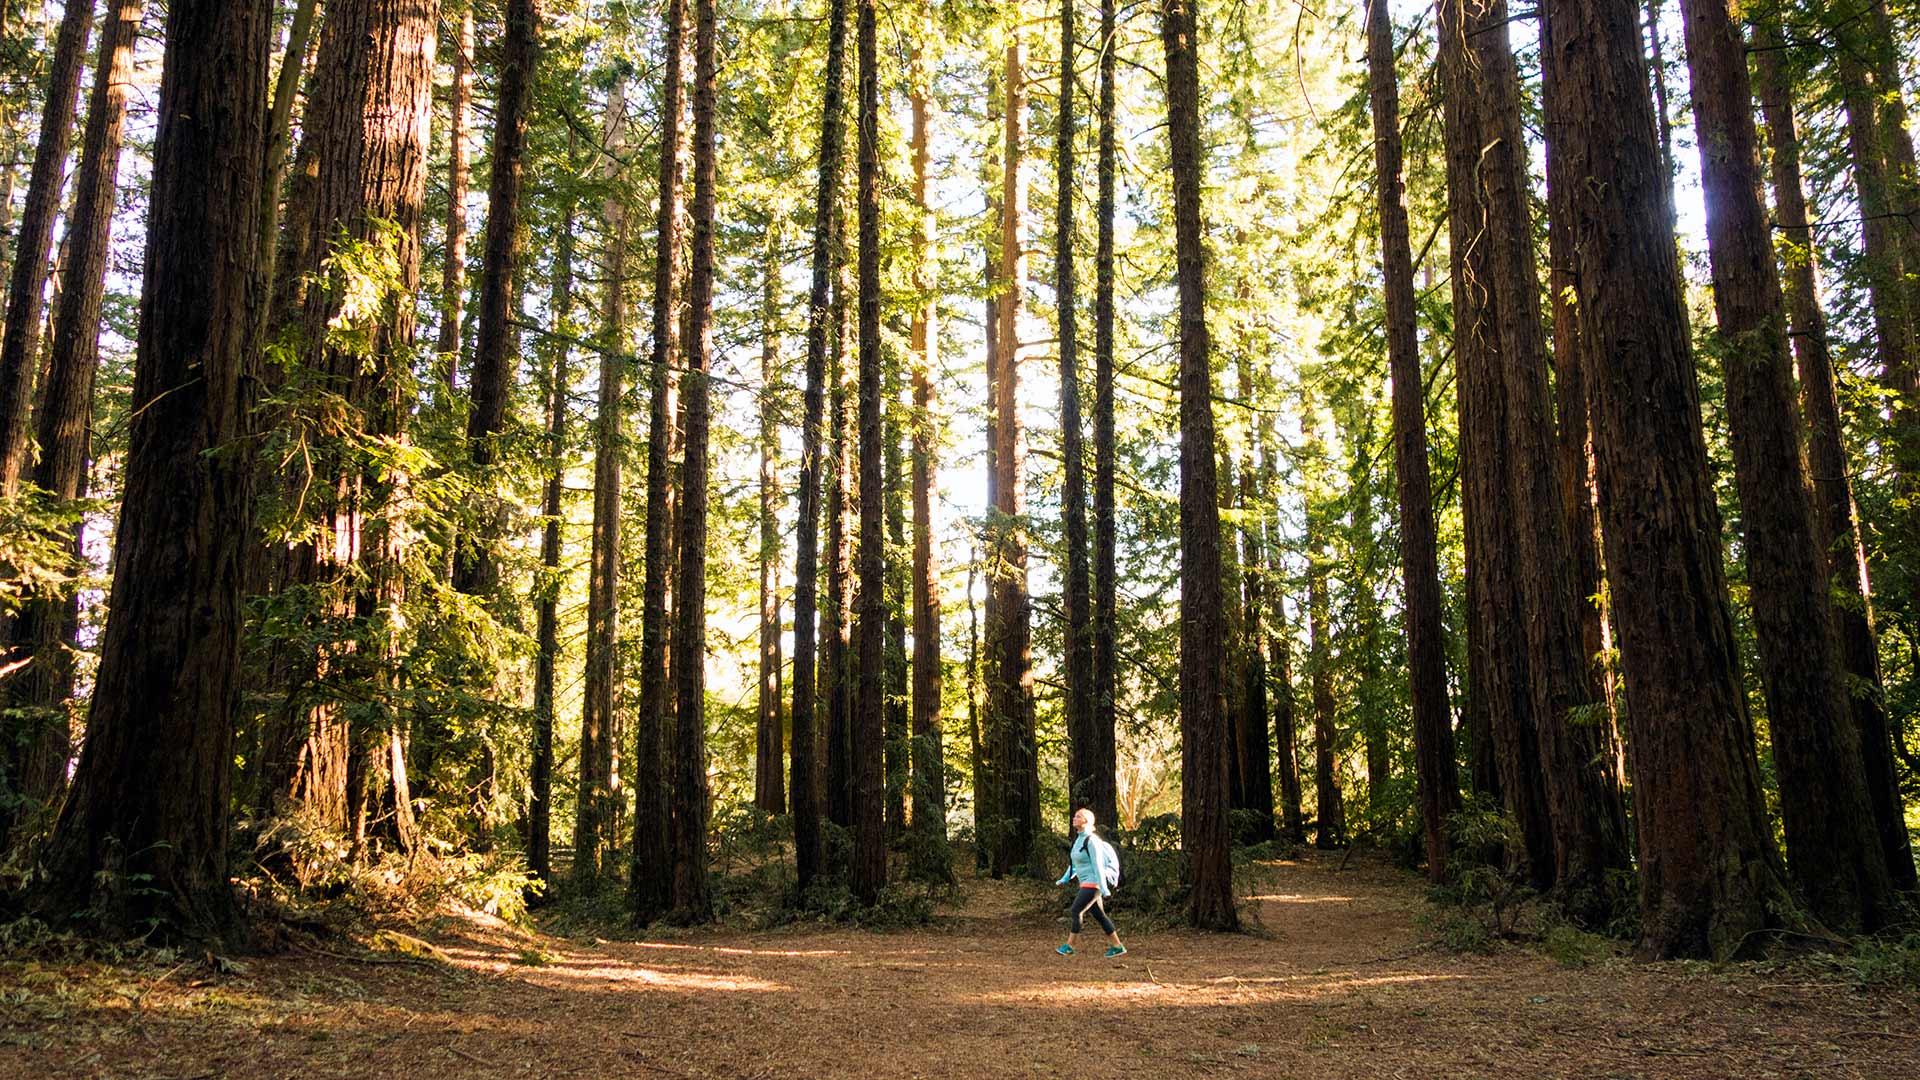 A woman walking on a trail through enormous redwood trees in Oakland, California